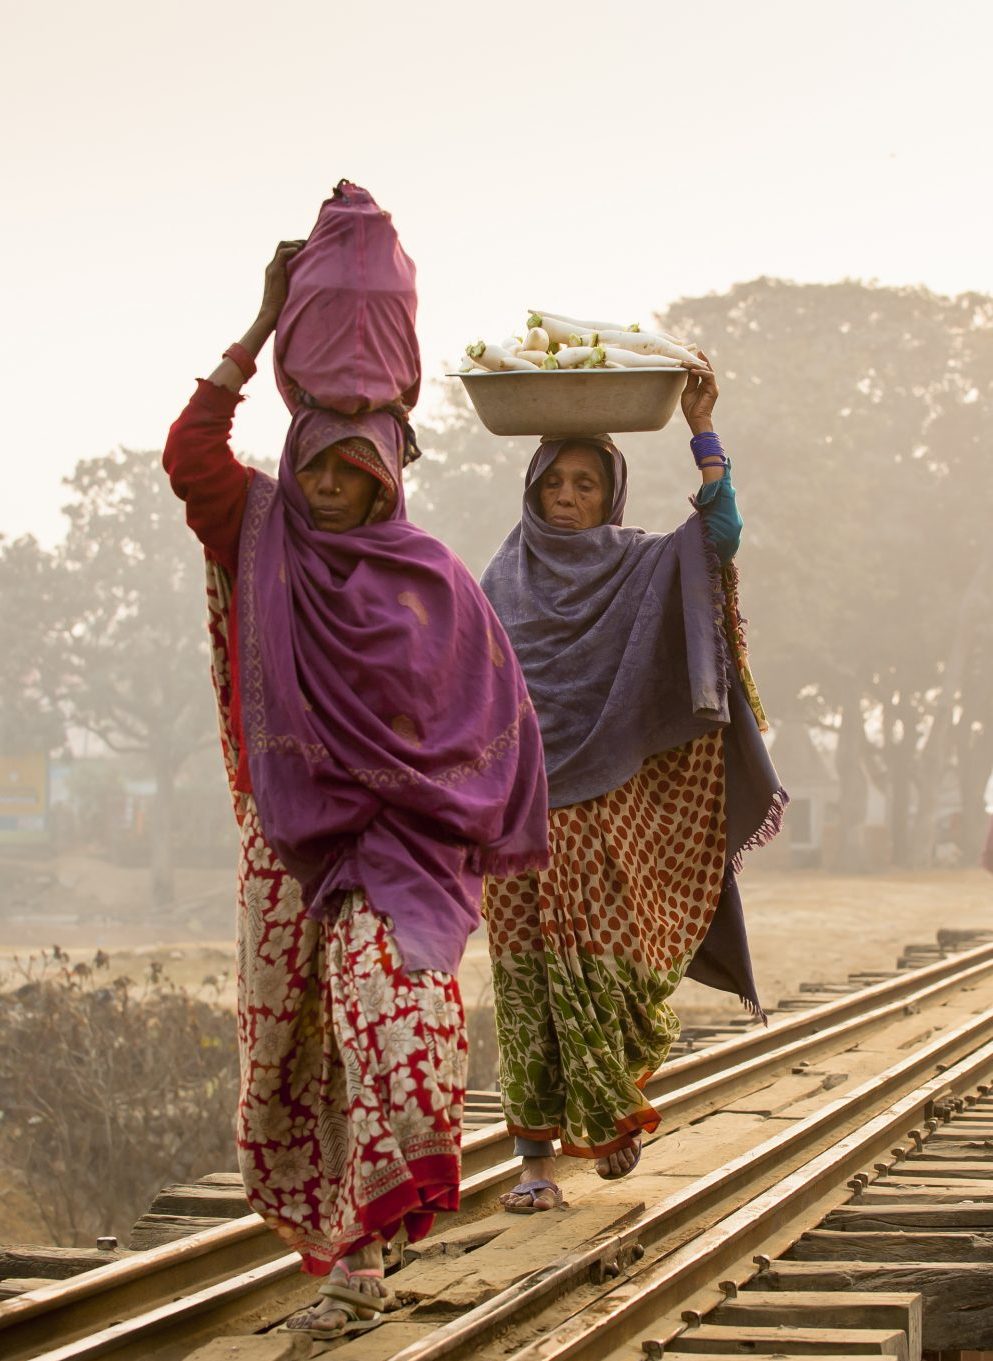 Women carrying items on their heads